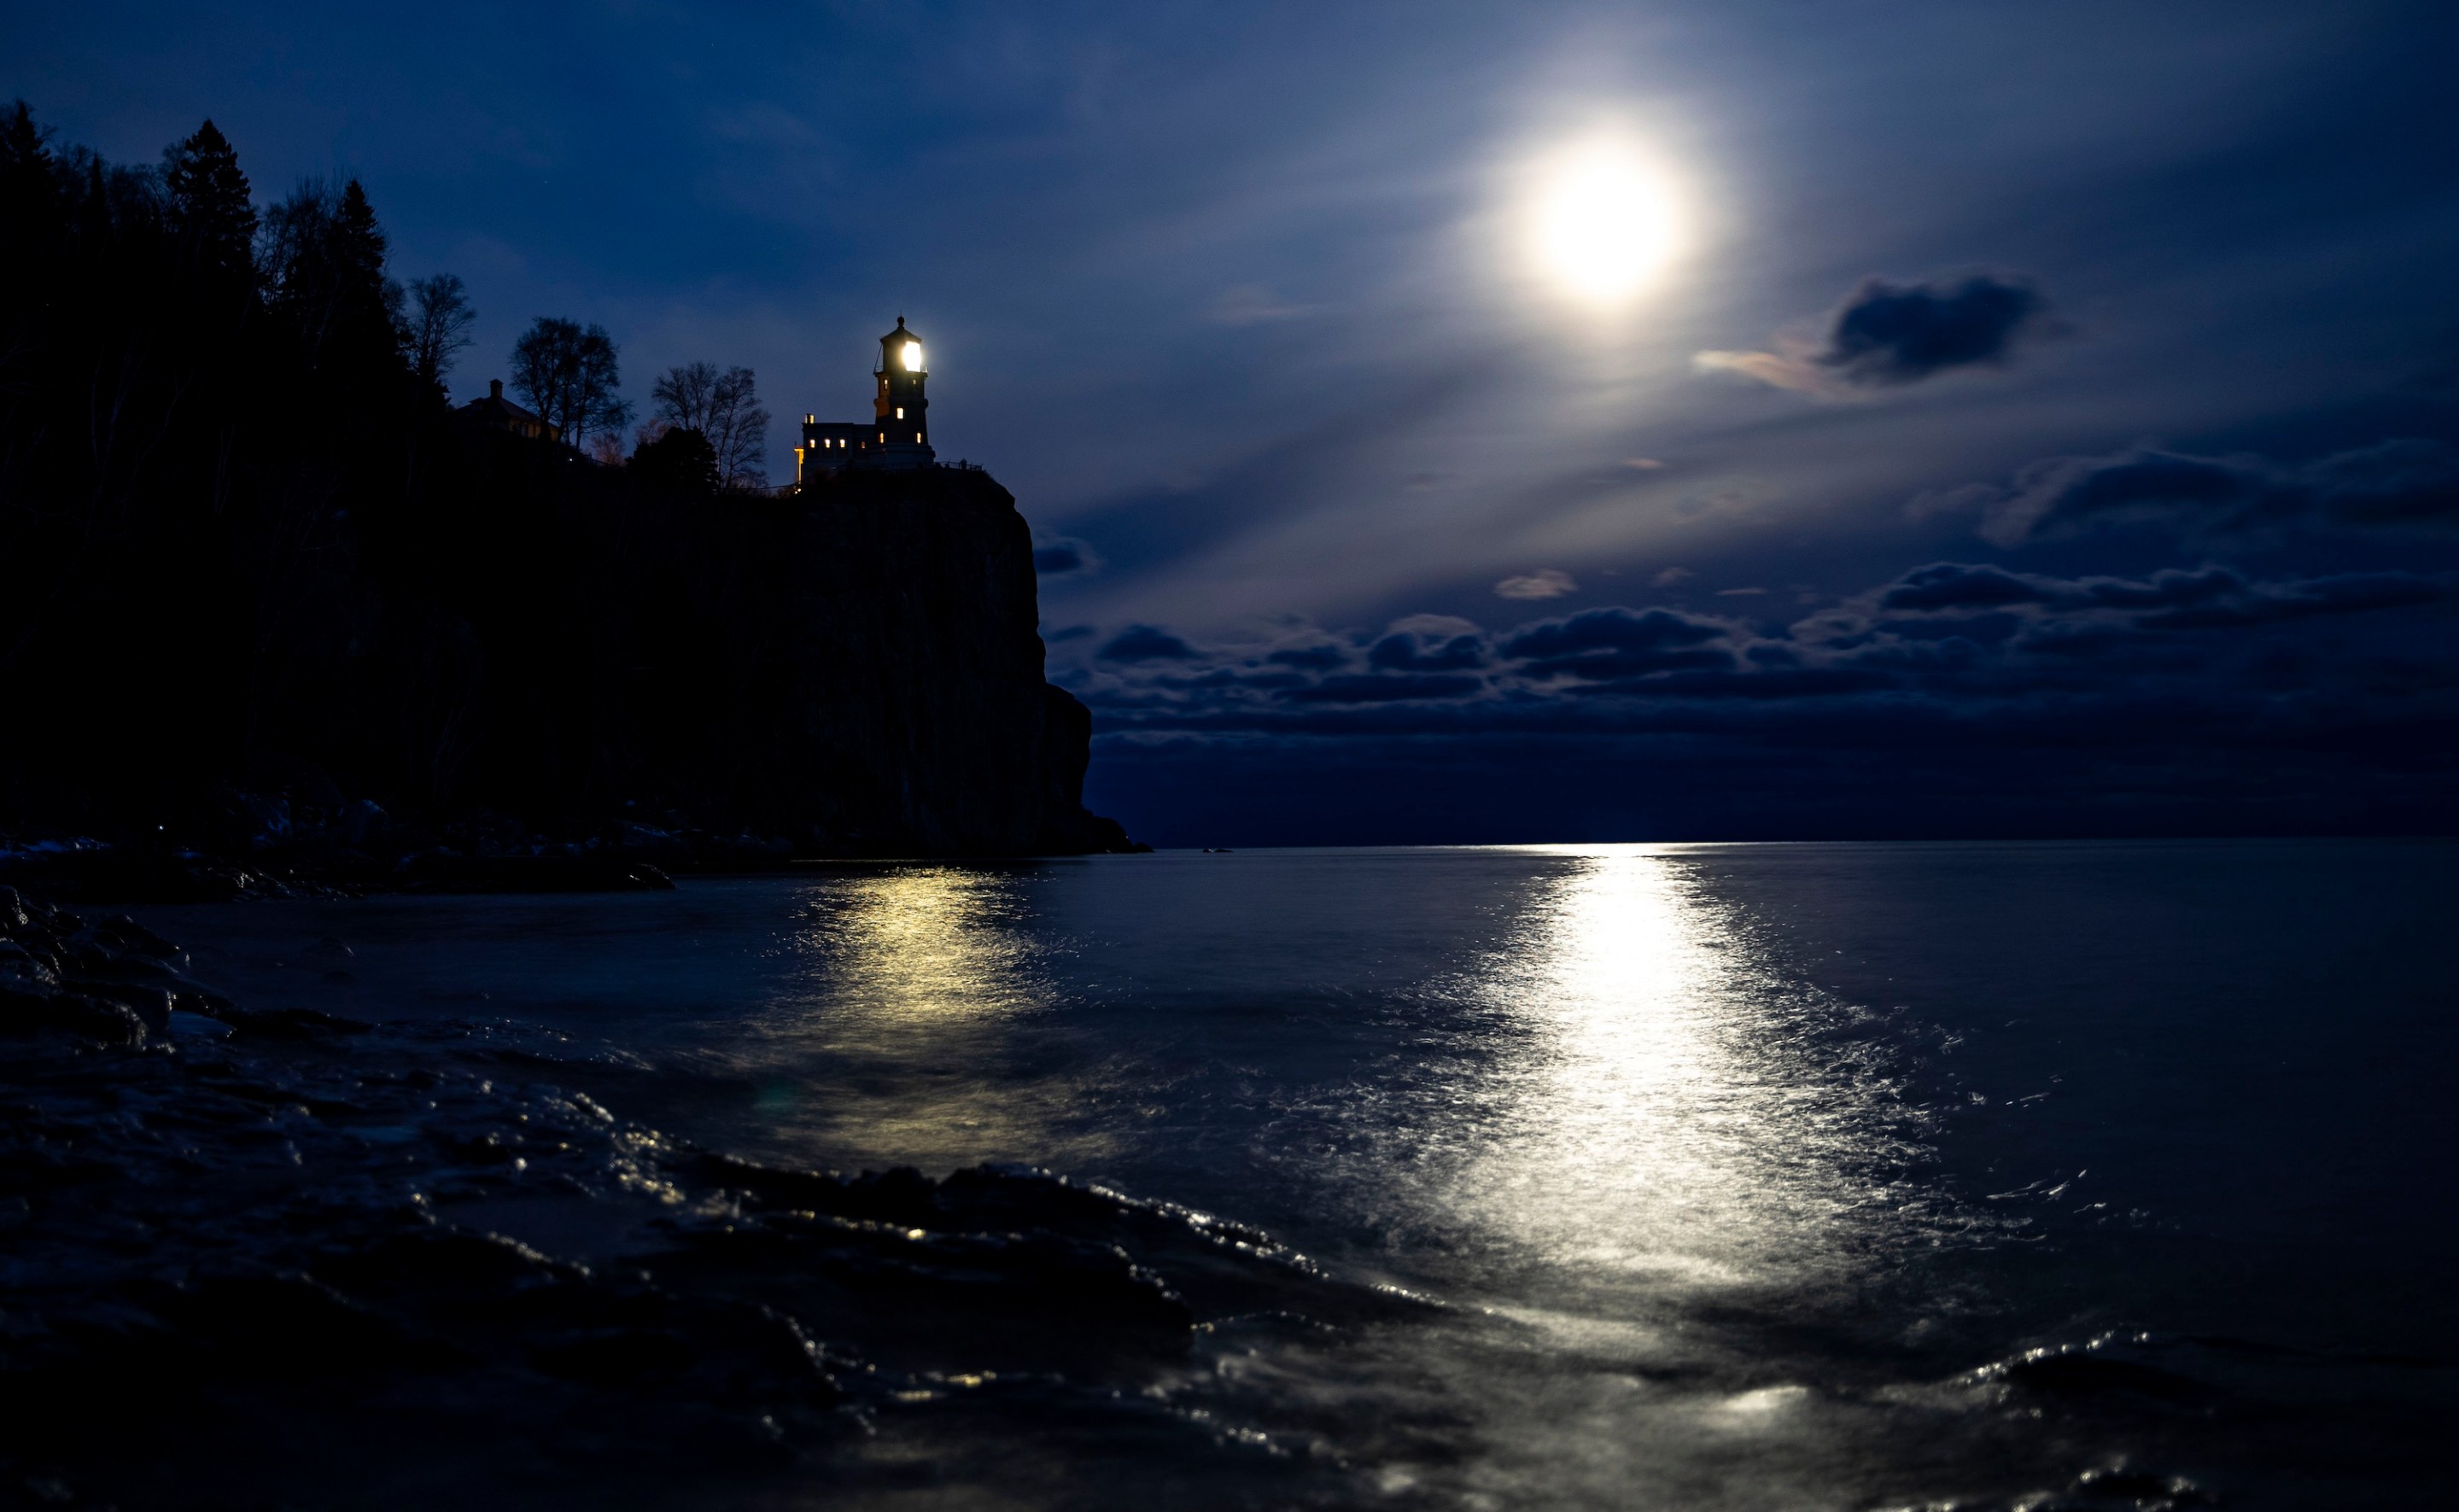 TWO HARBORS, MN - NOVEMBER 9: A bright moon shone over the horizon near the Split Rock Lighthouse on November 10, 2019. It was lit to honor the lives of the 29 men that died aboard the Edmund Fitzgerald 44 years ago. The lighthouse is only lit for approximately two hours and fifteen minutes each year. (Photo by Alex Kormann/Star Tribune via Getty Images)